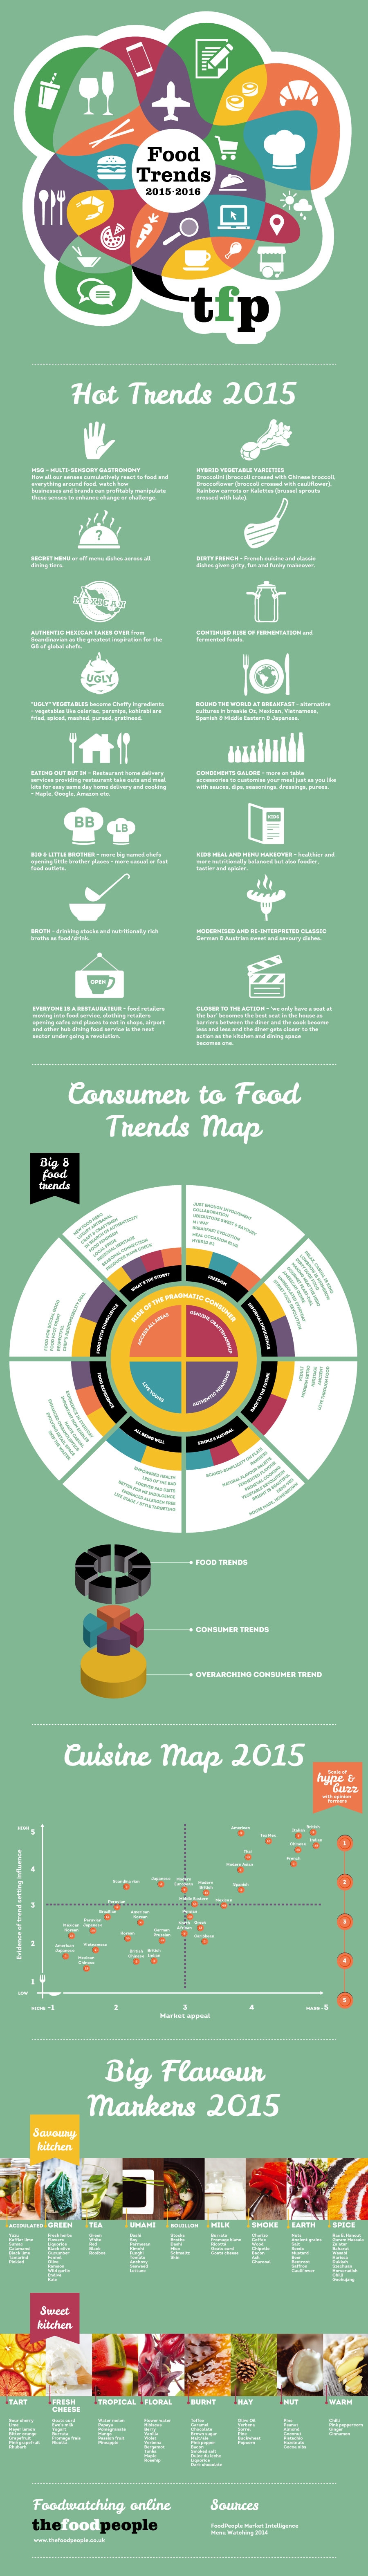 Infographic of 2015 Food Trends 